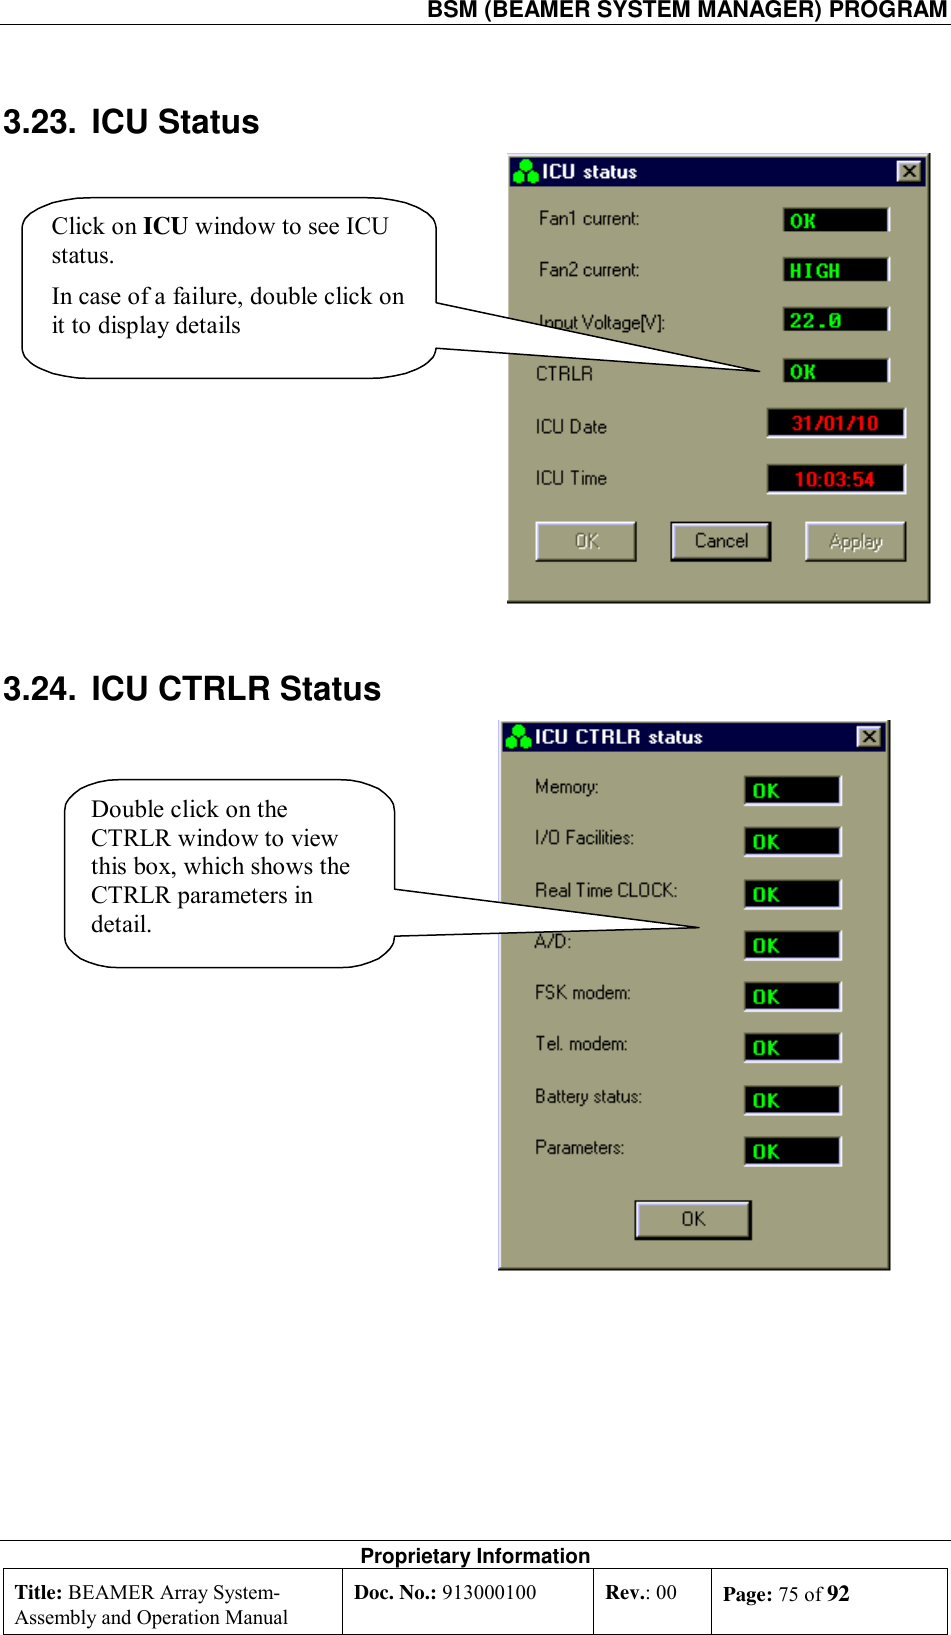   BSM (BEAMER SYSTEM MANAGER) PROGRAM Proprietary Information Title: BEAMER Array System- Assembly and Operation Manual Doc. No.: 913000100  Rev.: 00  Page: 75 of 92  3.23. ICU Status Click on ICU window to see ICUstatus.In case of a failure, double click onit to display details 3.24.  ICU CTRLR Status Double click on theCTRLR window to viewthis box, which shows theCTRLR parameters indetail.  